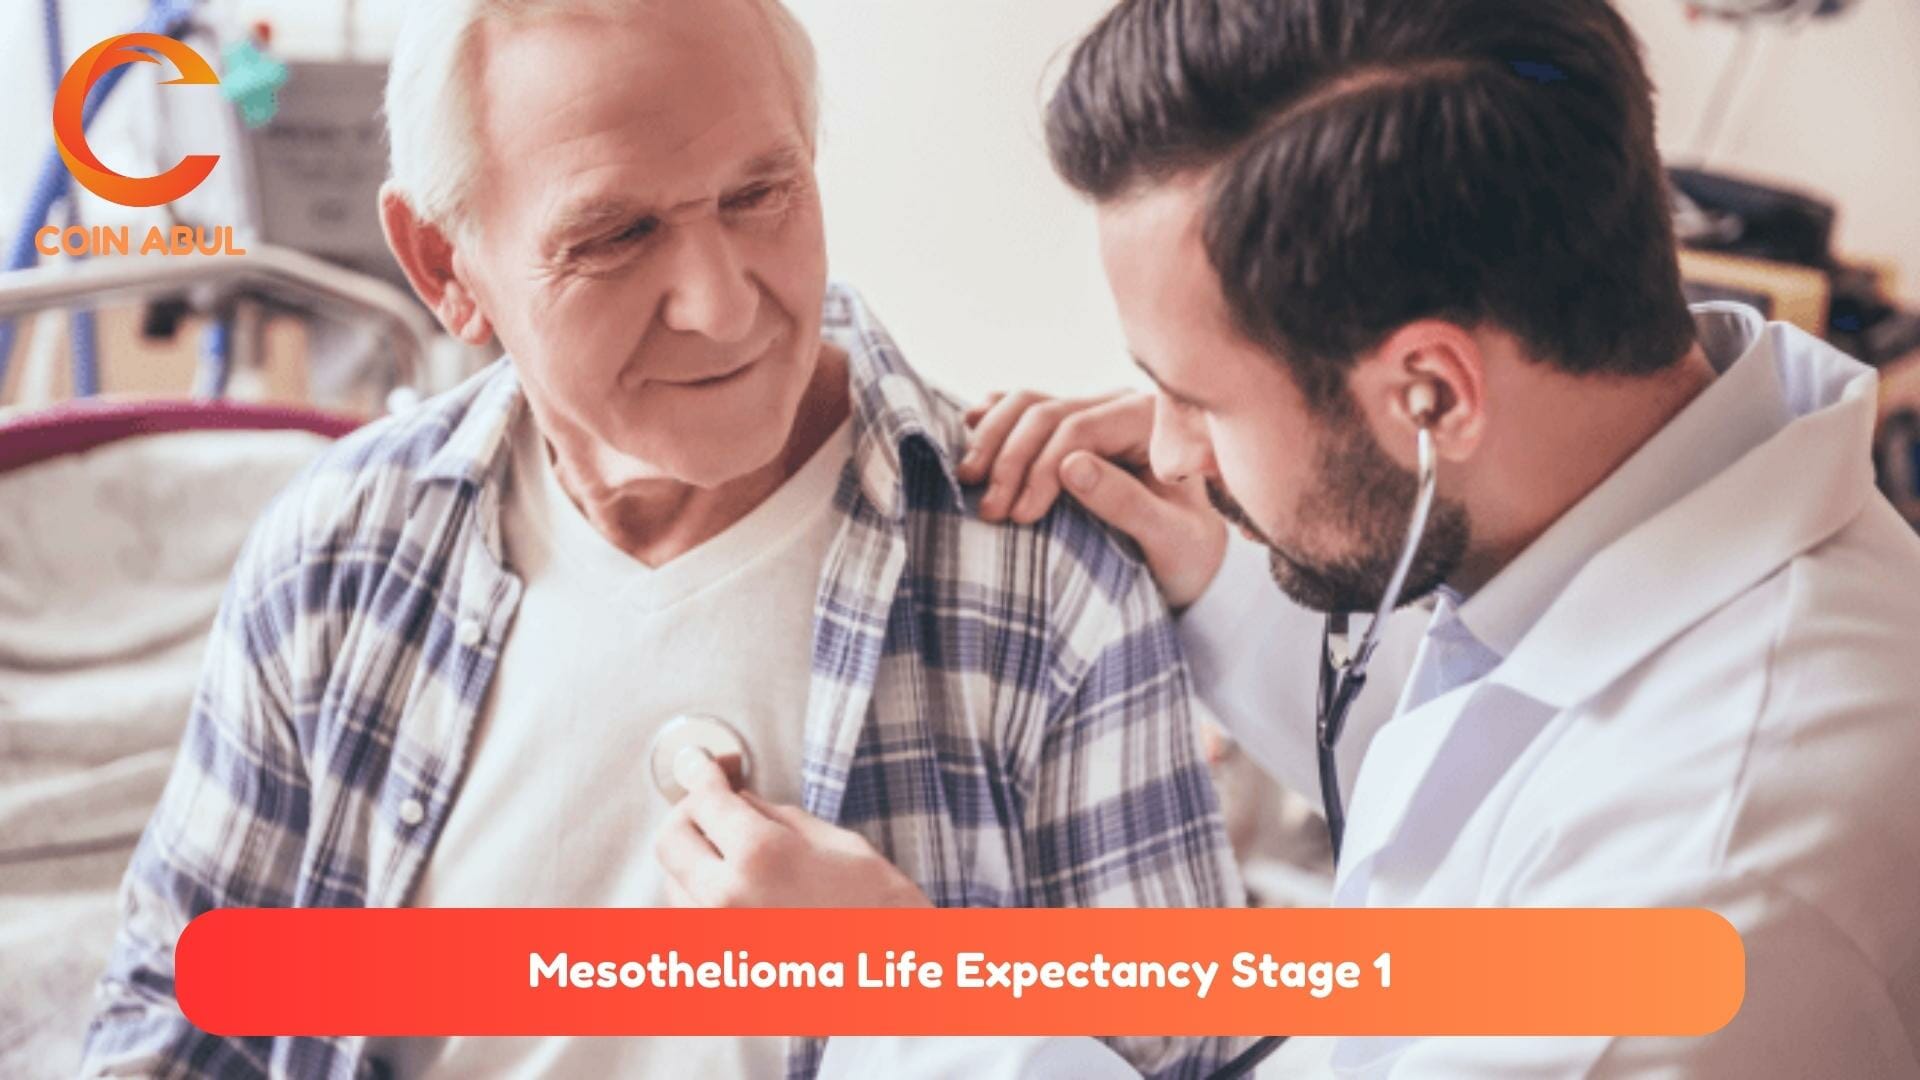 Mesothelioma Life Expectancy Stage 1